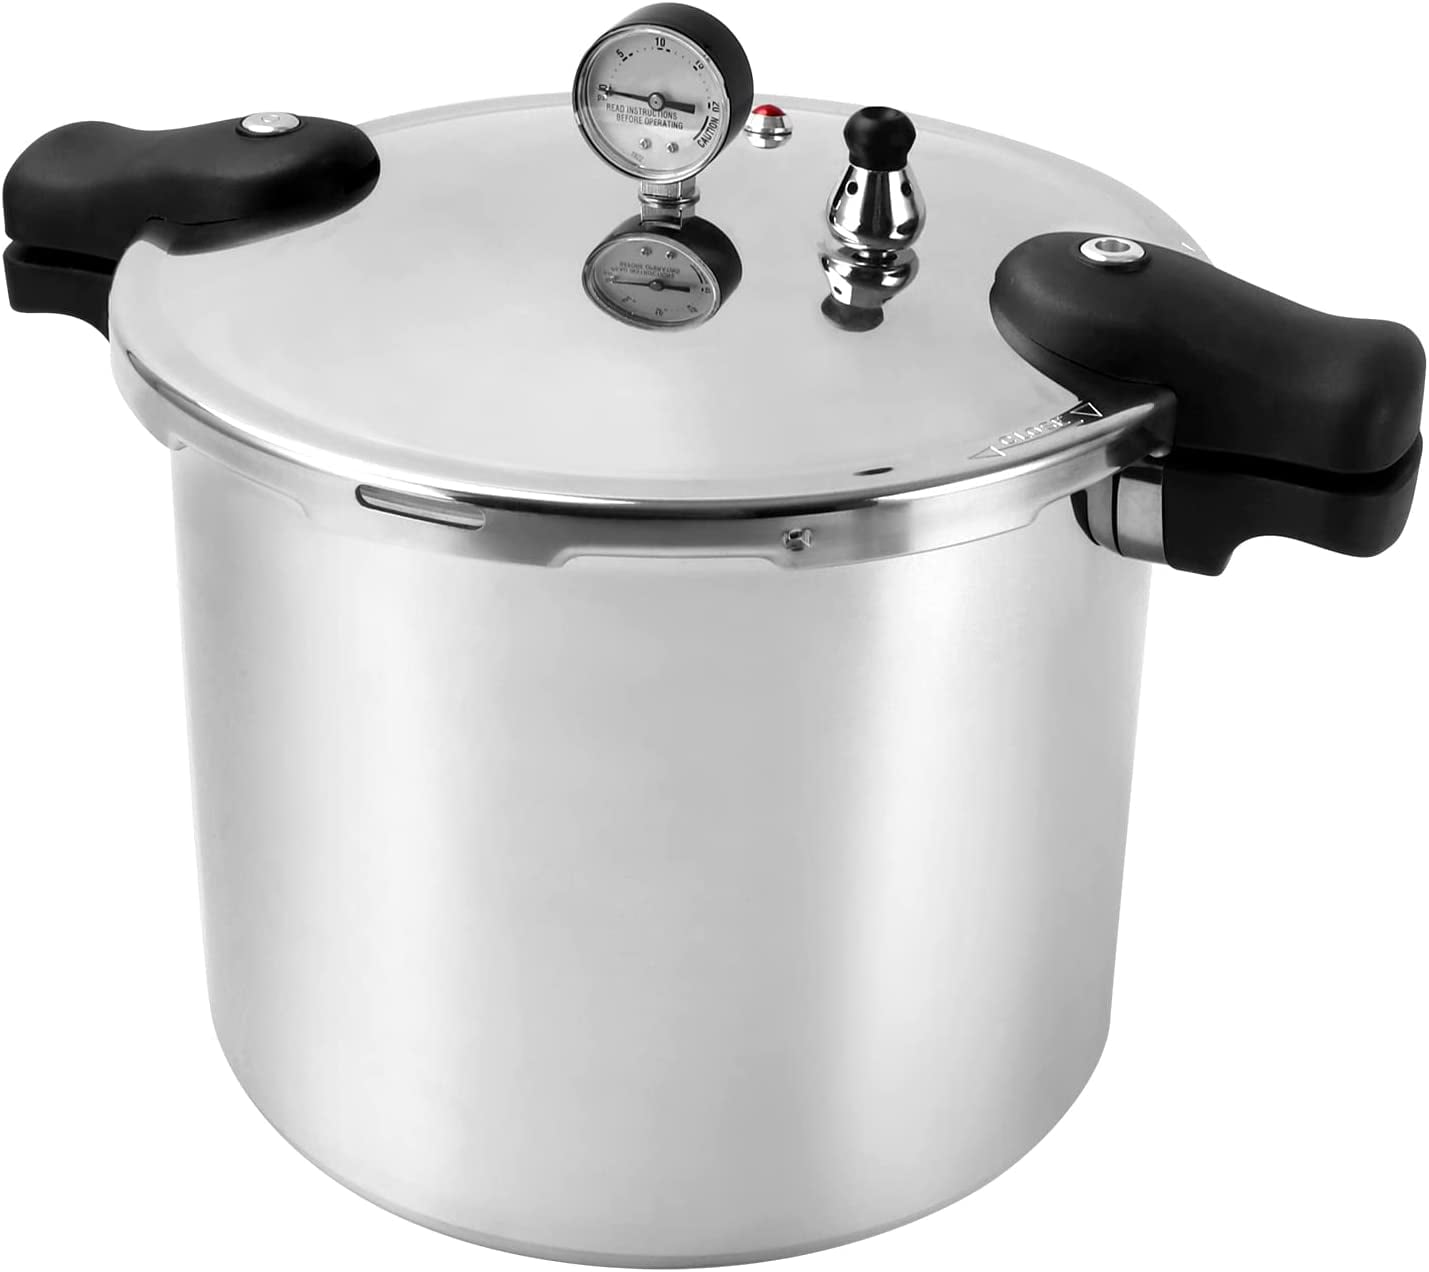 BreeRainz 5.3 Quart Pressure Cooker, 10 PSI Induction Compatible Pressure  Canner w/Honeycomb Stainless Steel Clad Base for Fast & Even Heating